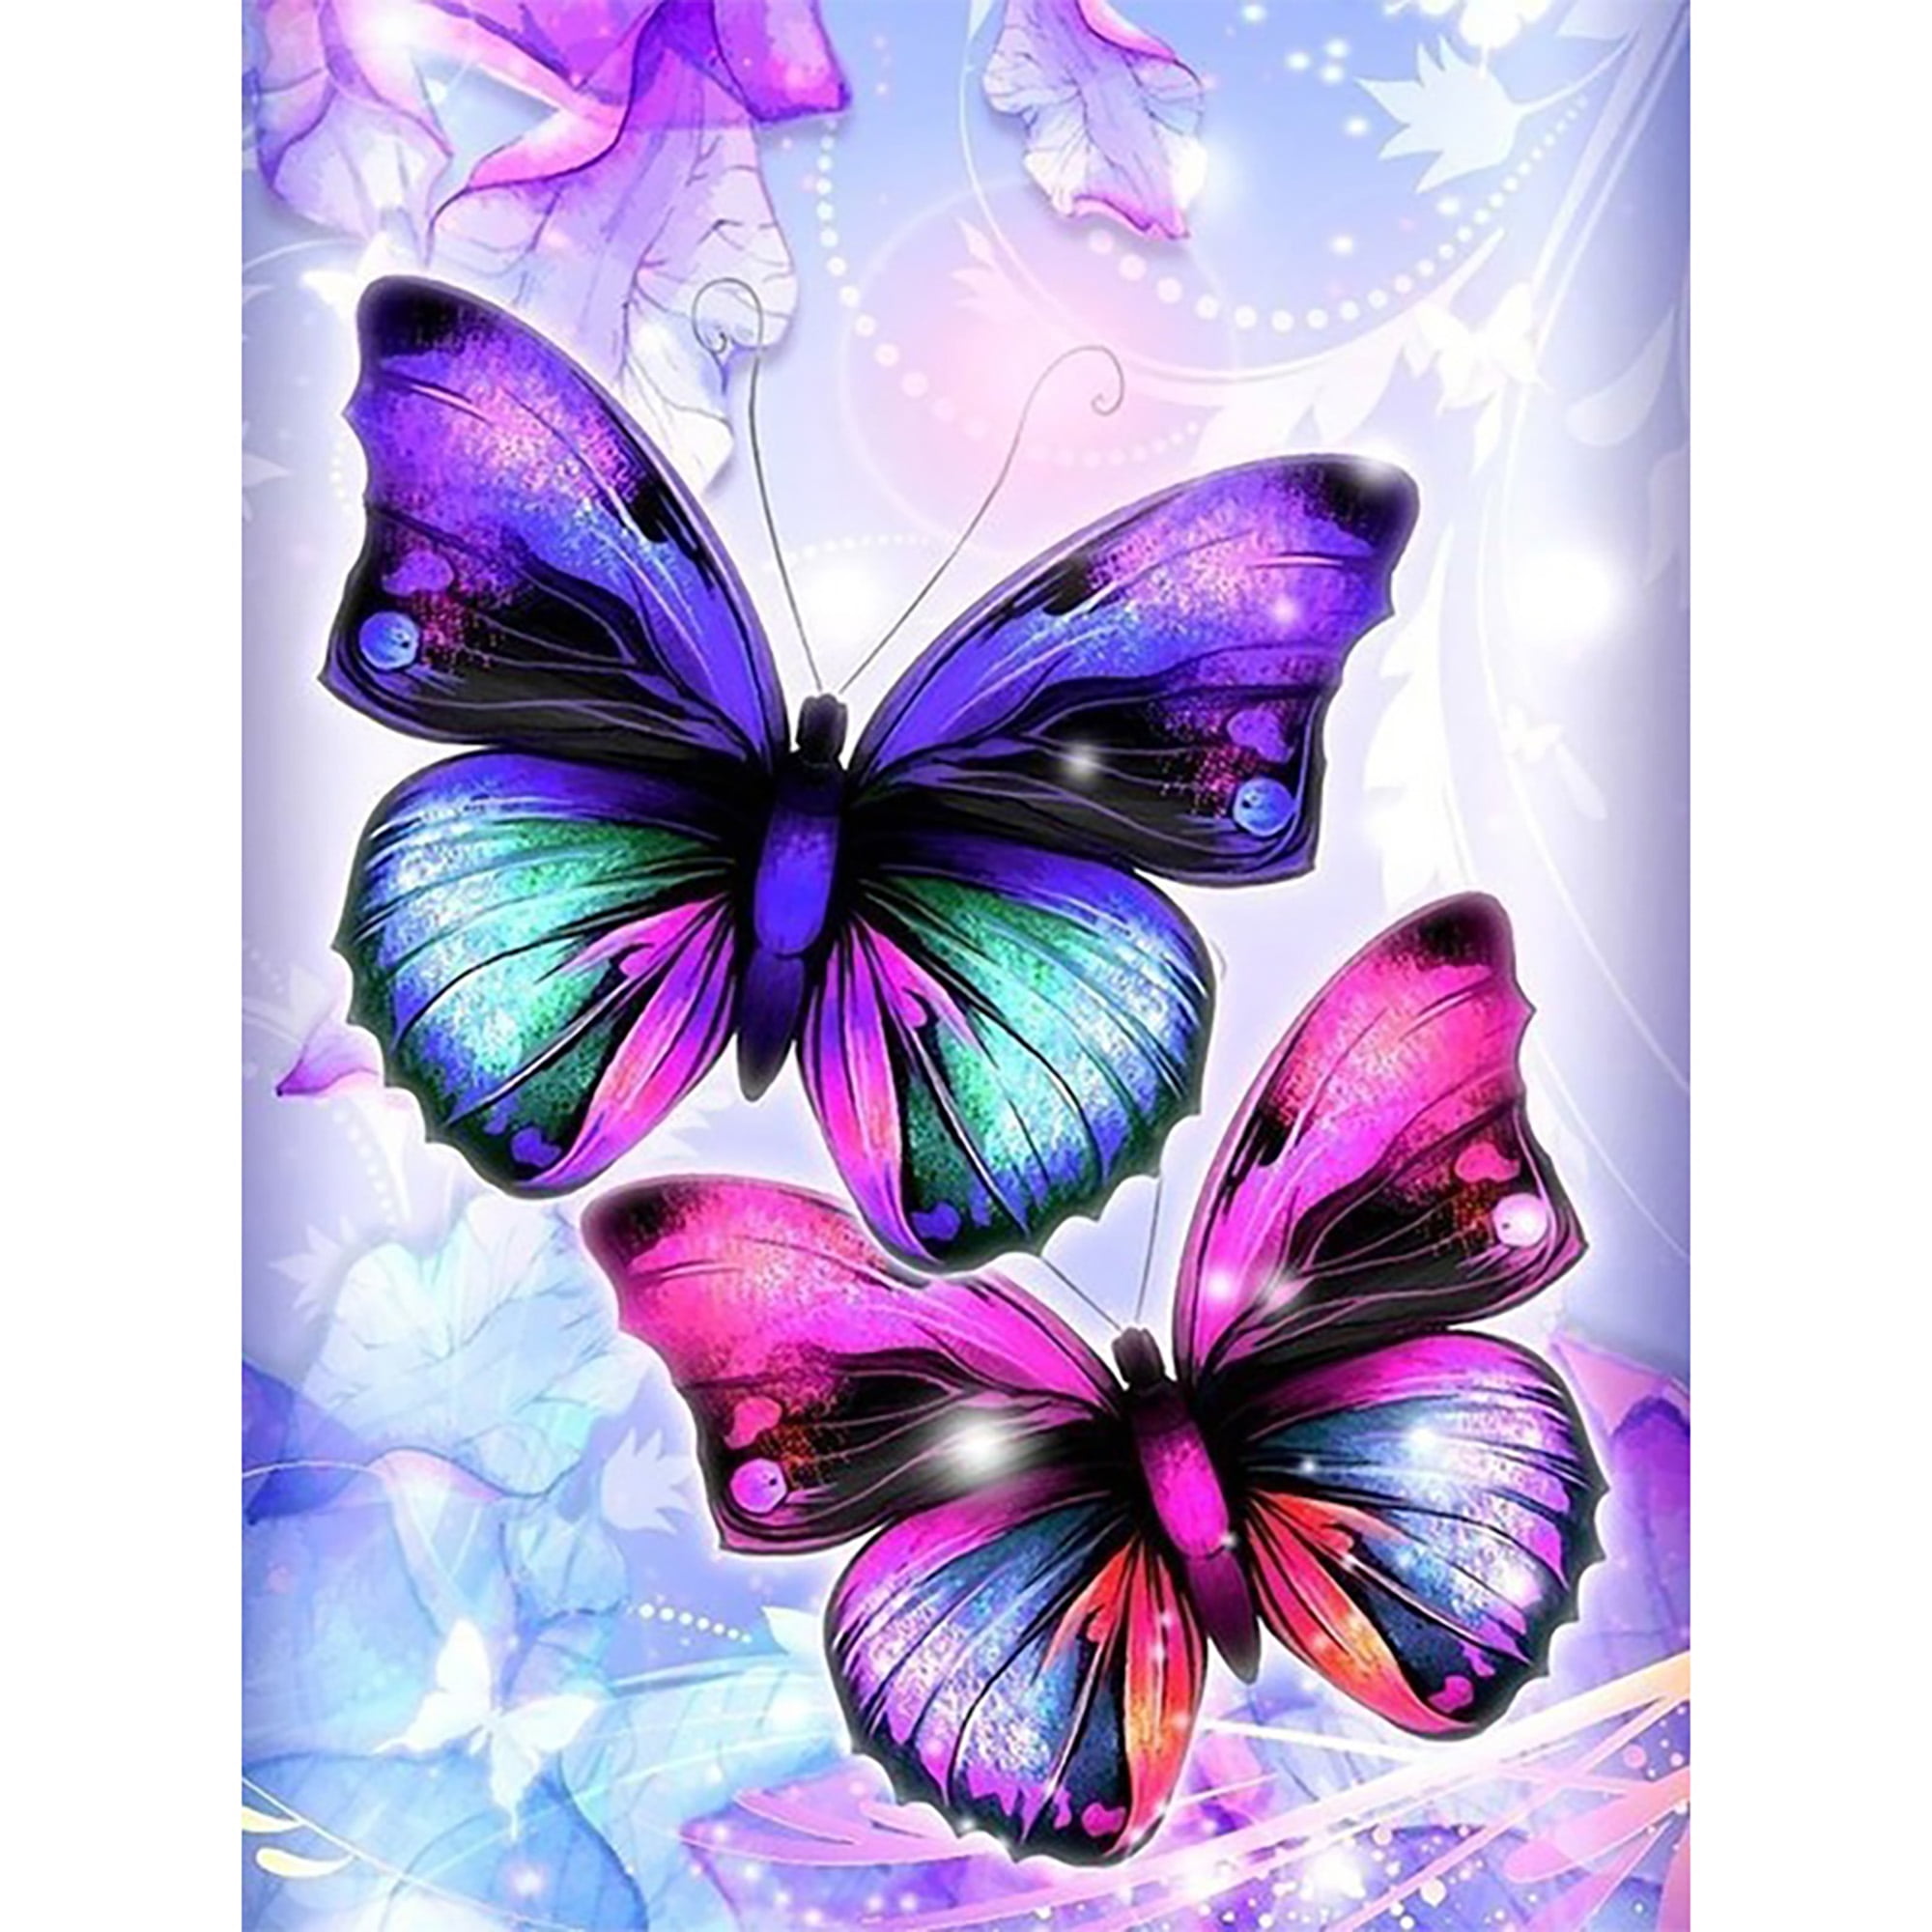 Butterfly 5D Diamond Painting Embroidery Cross Craft Stitch Arts Kit Mural Home Decor 